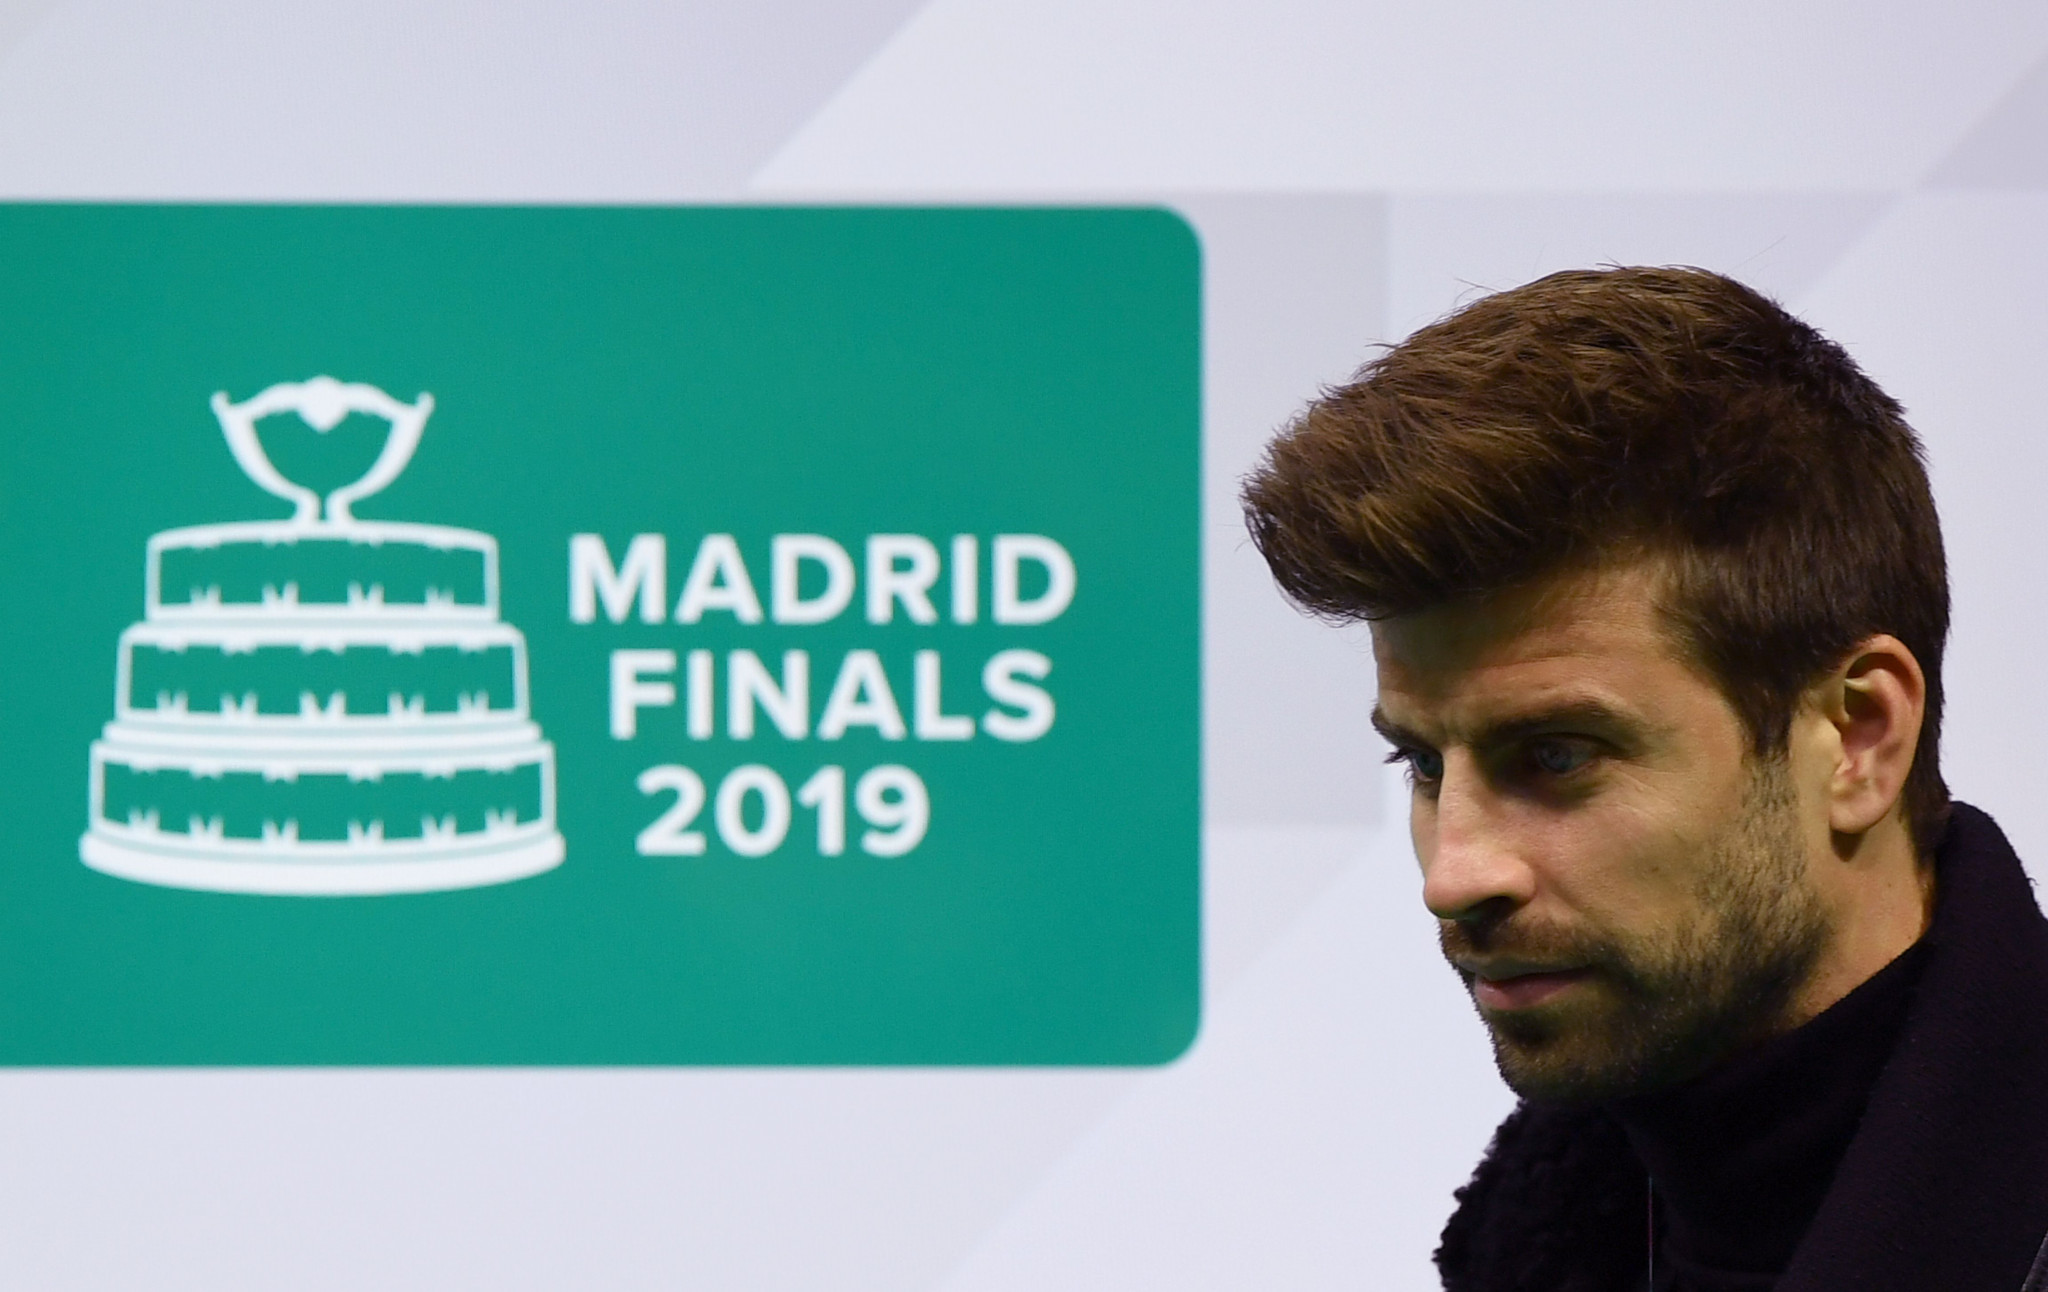 Football star Gerard Pique has been heavily involved in the revamped Davis Cup Finals ©Getty Images